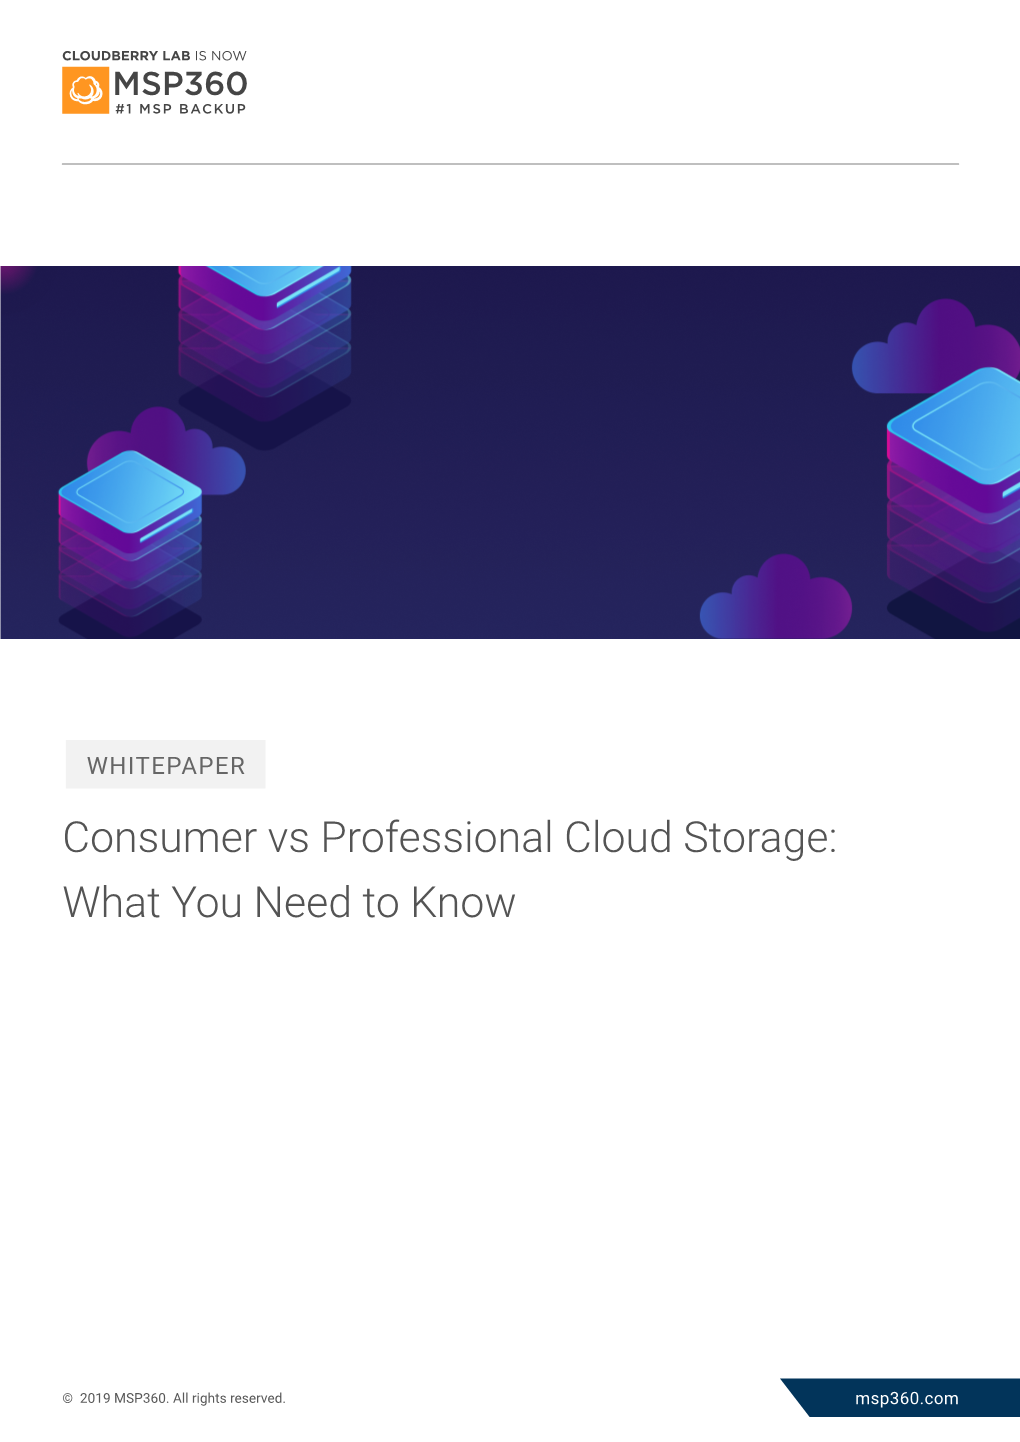 Consumer Vs Professional Cloud Storage: What You Need to Know